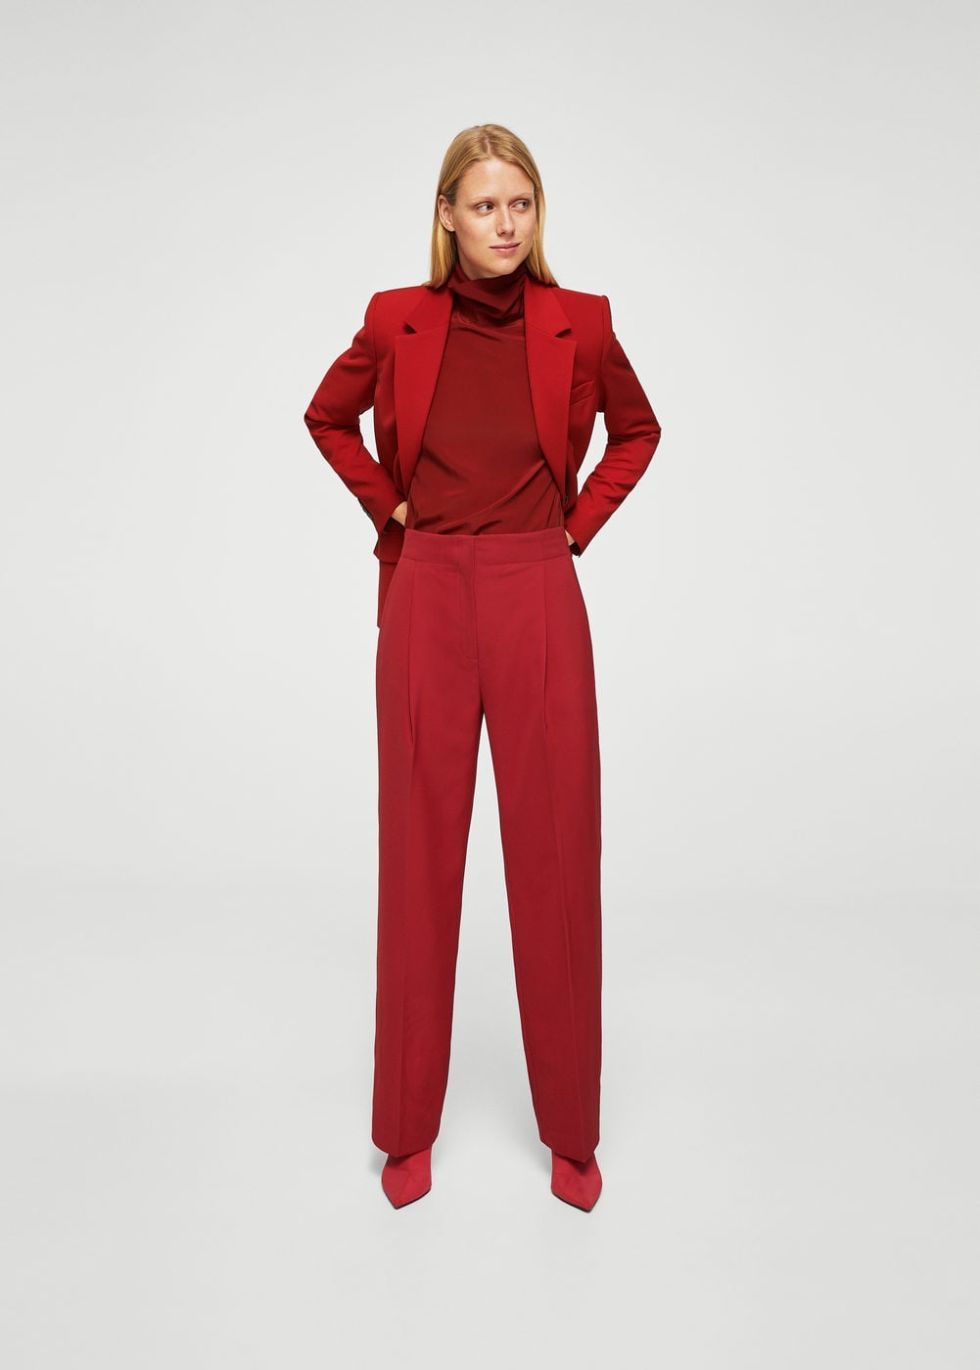 Clothing, Red, Standing, Suit, Shoulder, Neck, Trousers, Outerwear, Leg, Overall, 